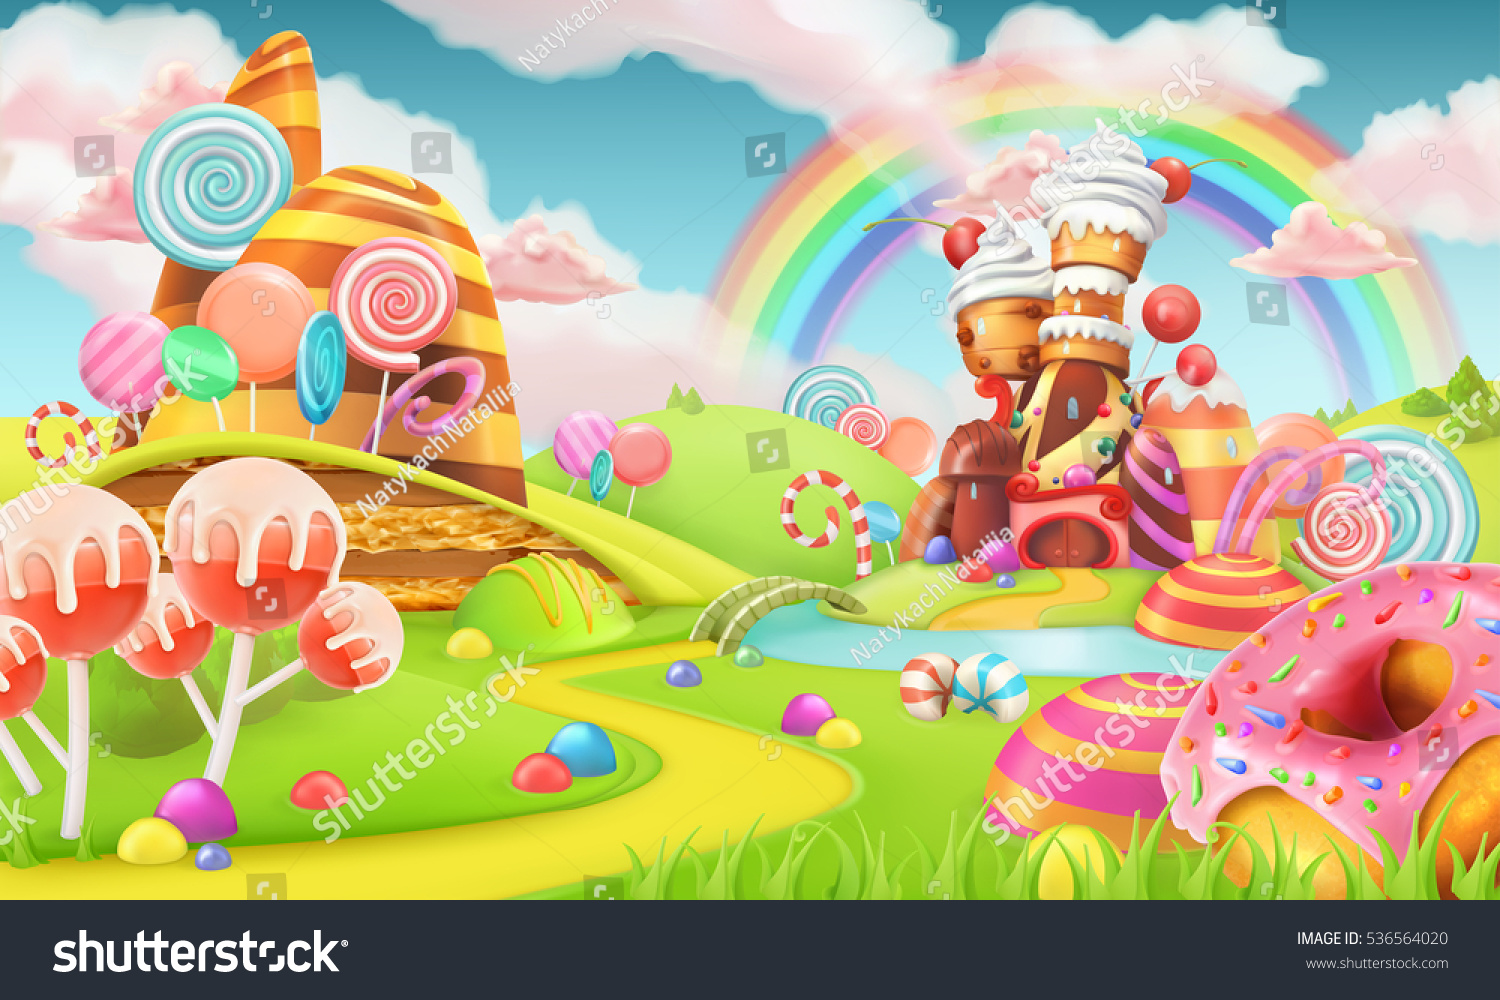 Sweet Candy Land Cartoon Game Background Stock Vector 536564020